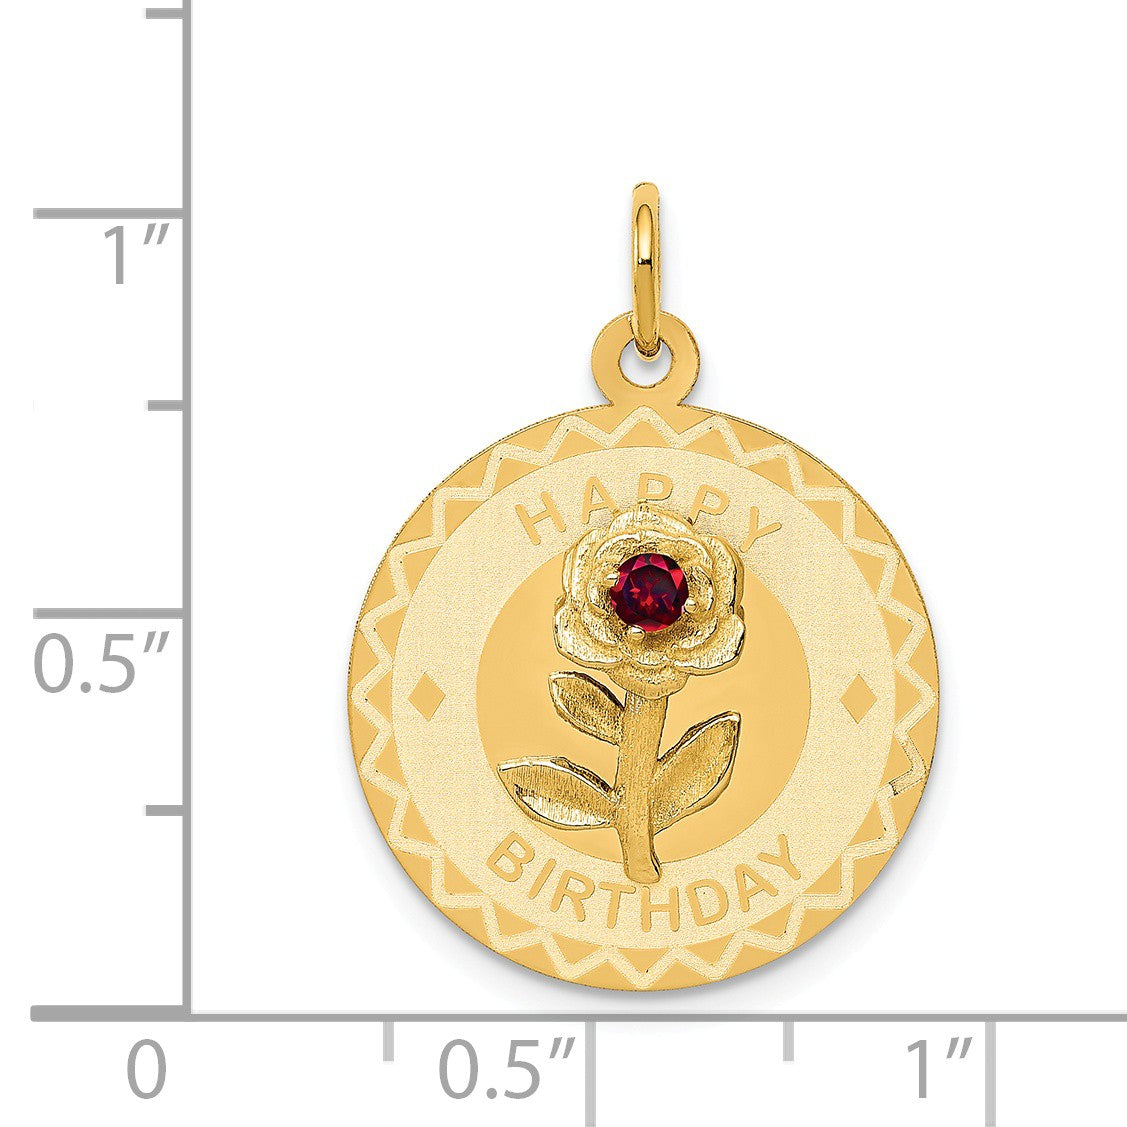 Alternate view of the 14k Yellow Gold Happy Birthday Disc Charm or Pendant w CZ Flower, 19mm by The Black Bow Jewelry Co.